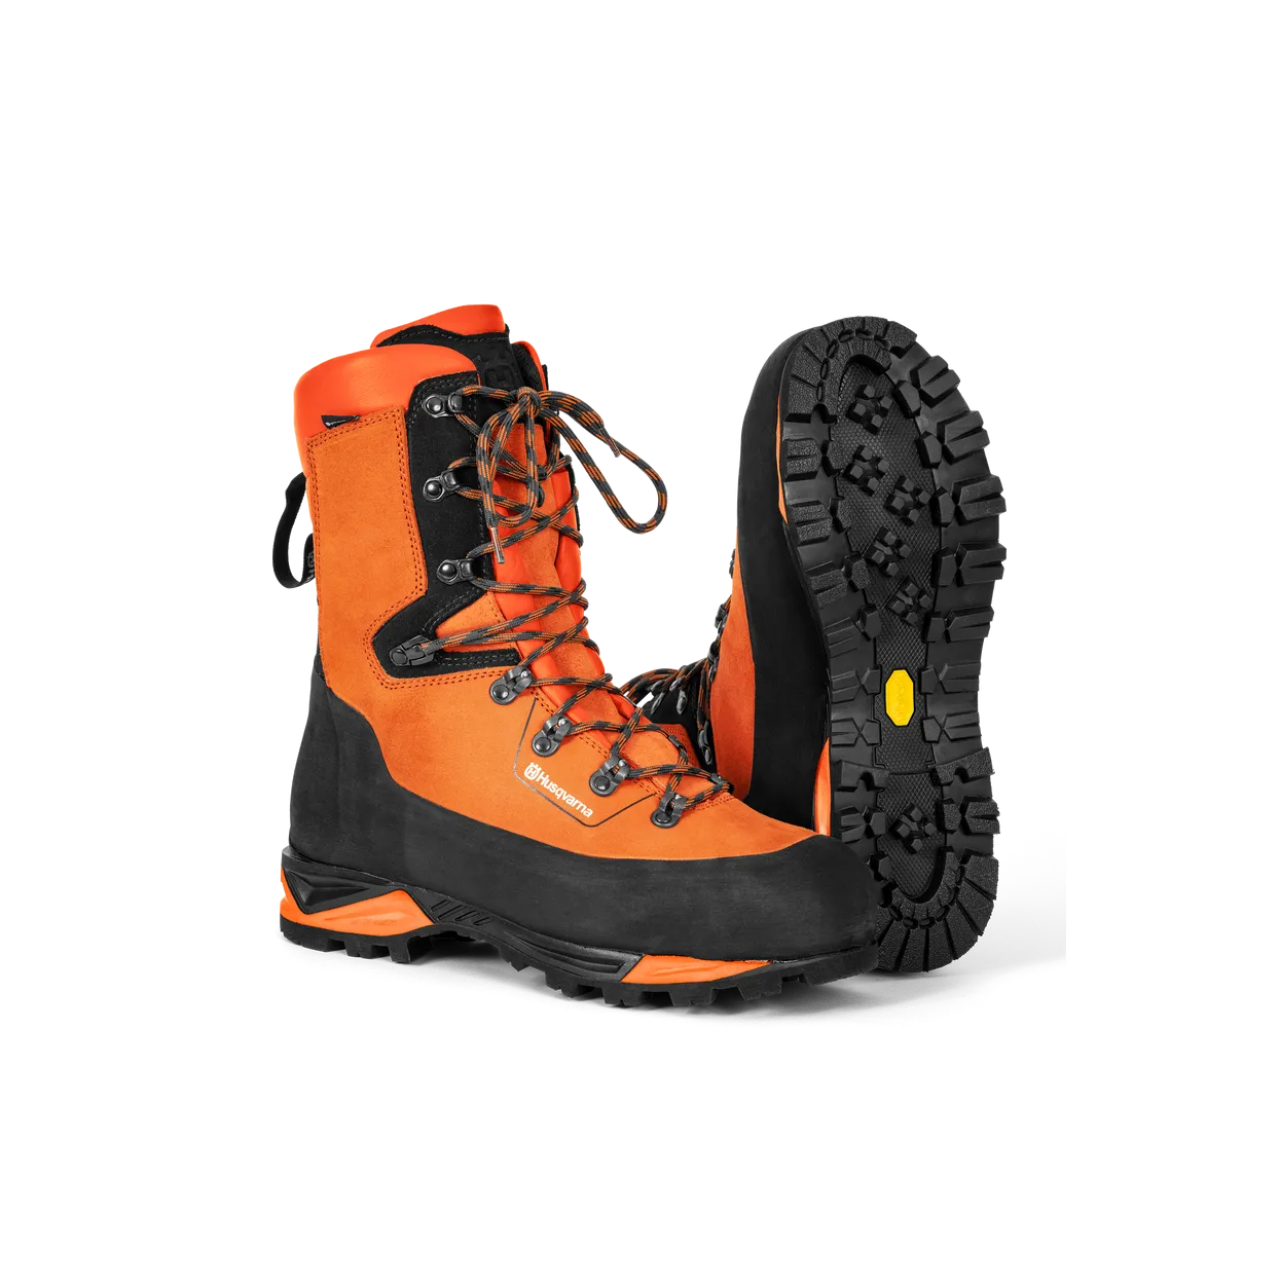 Stiefel Technical 24